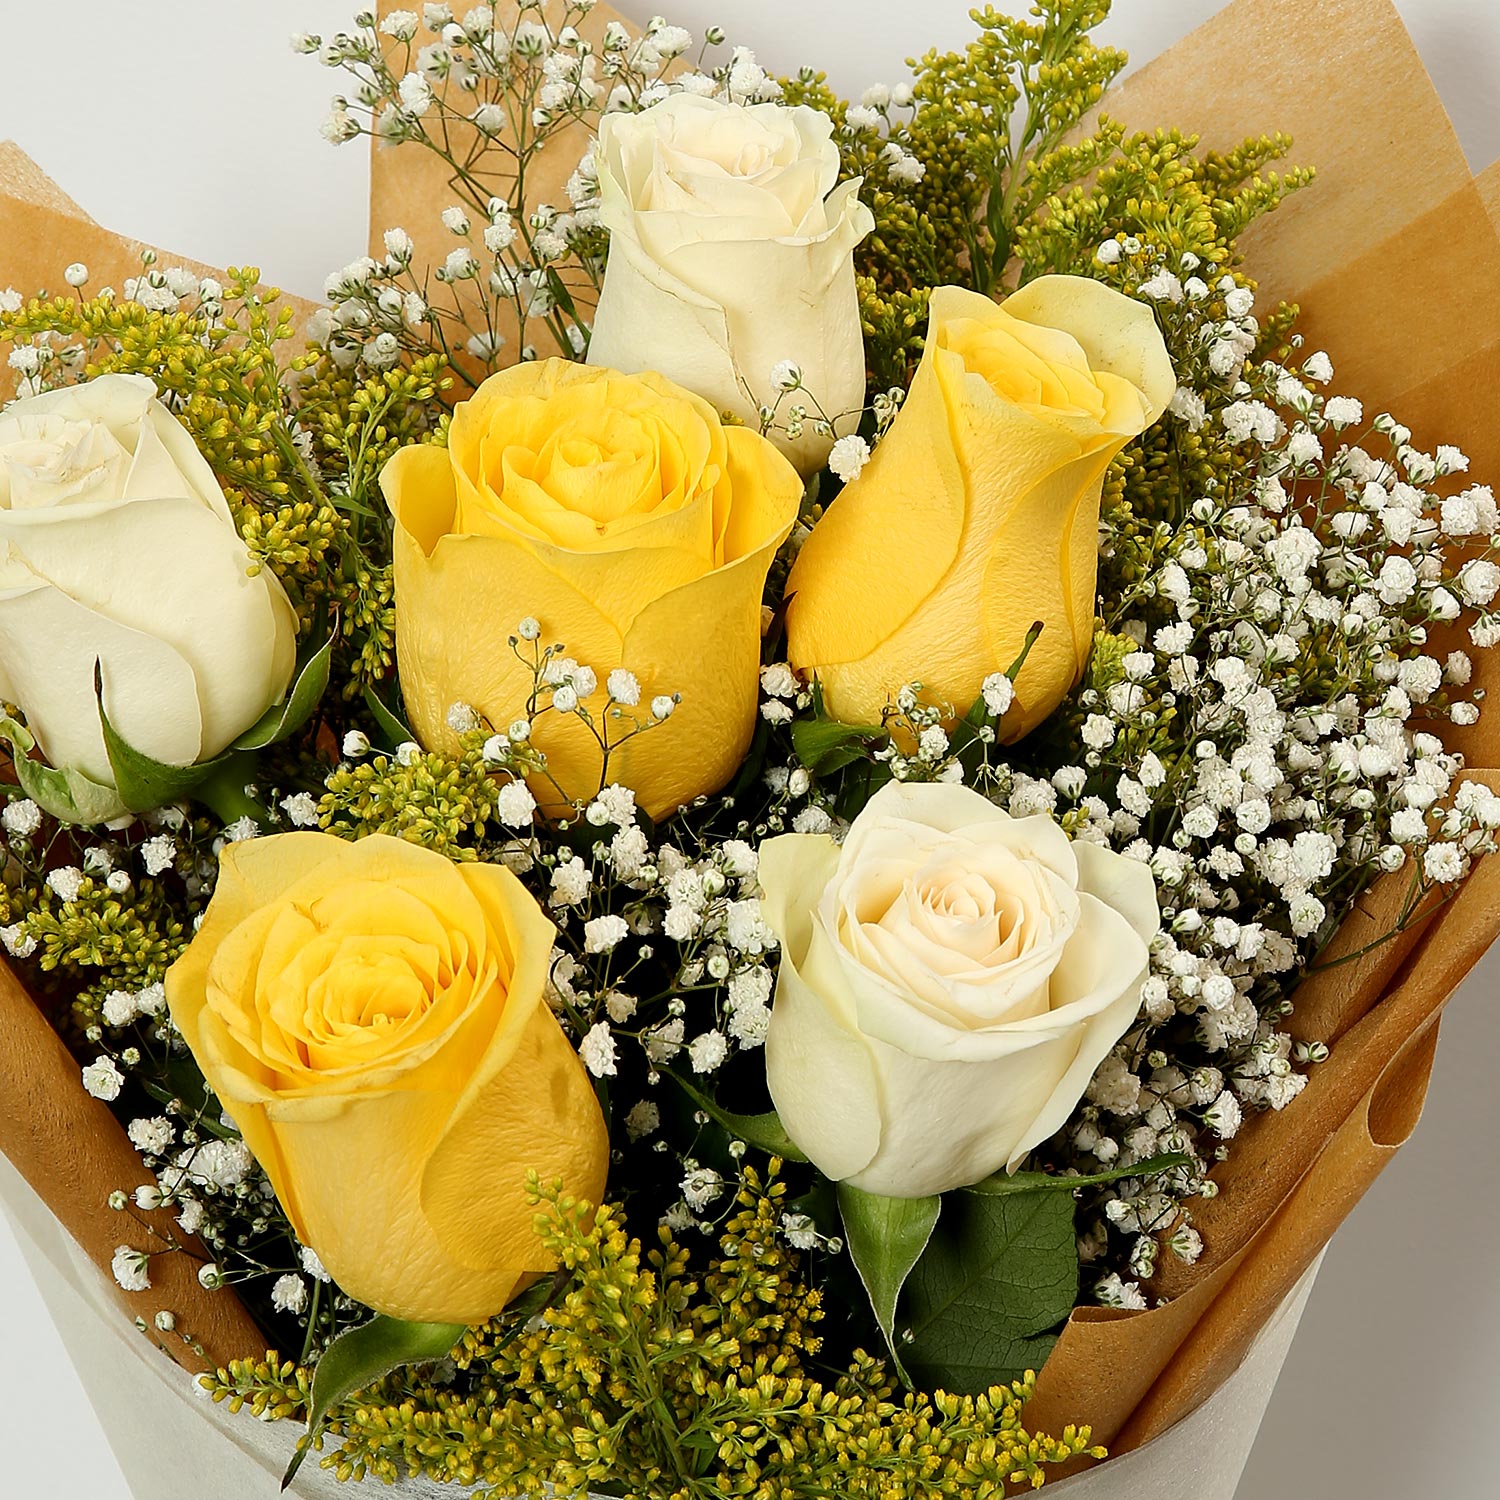 Buy White and Yellow Roses Bouquet | Arablly.com